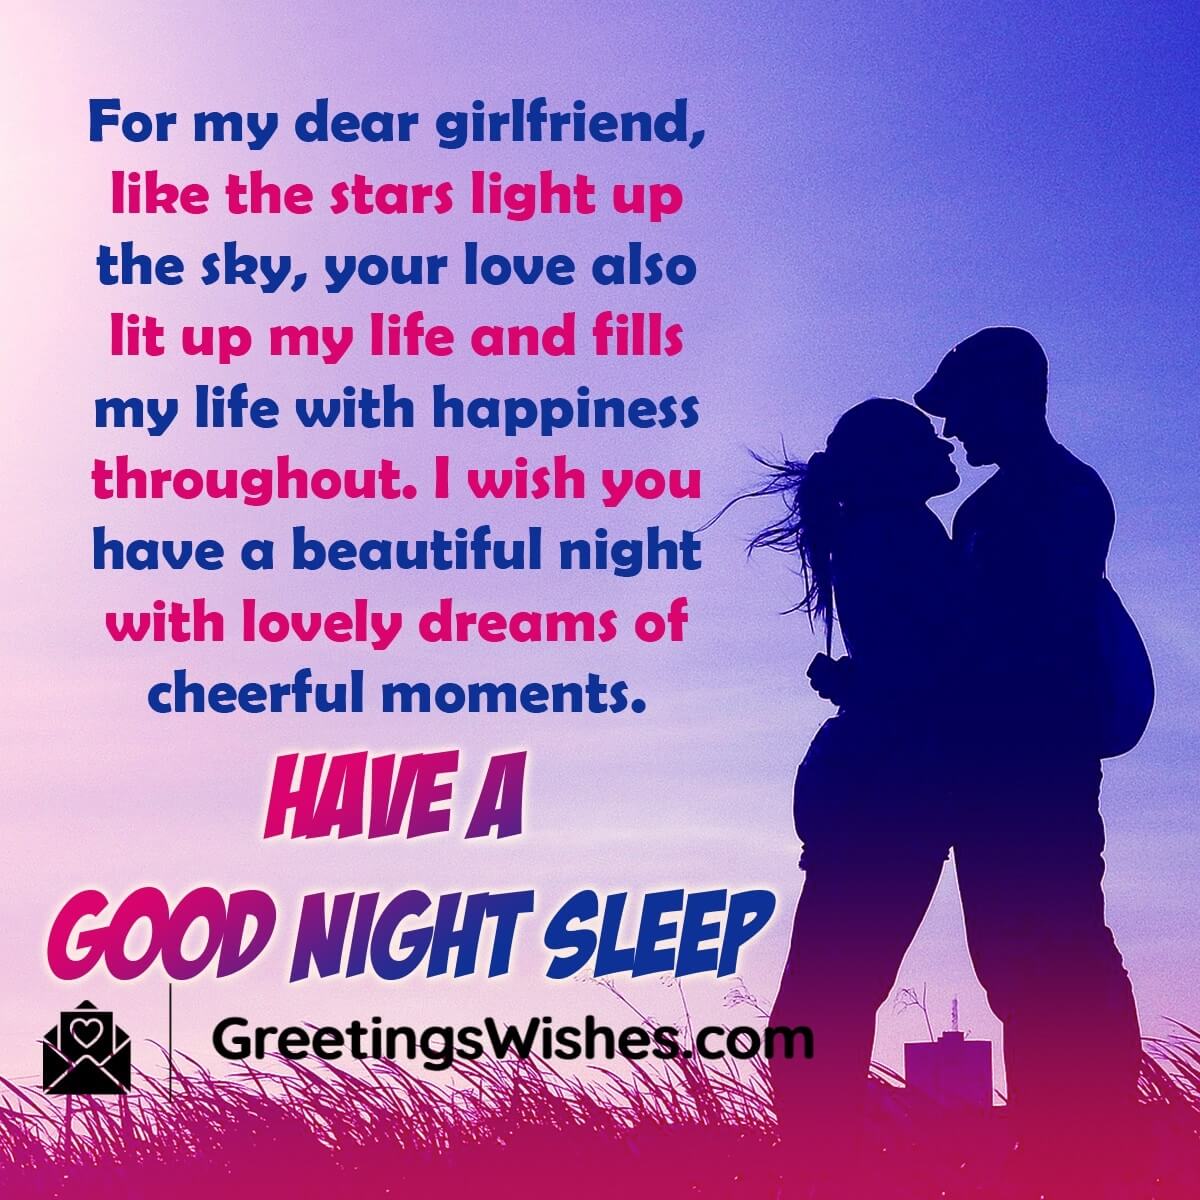 Good Night Messages for Girlfriend